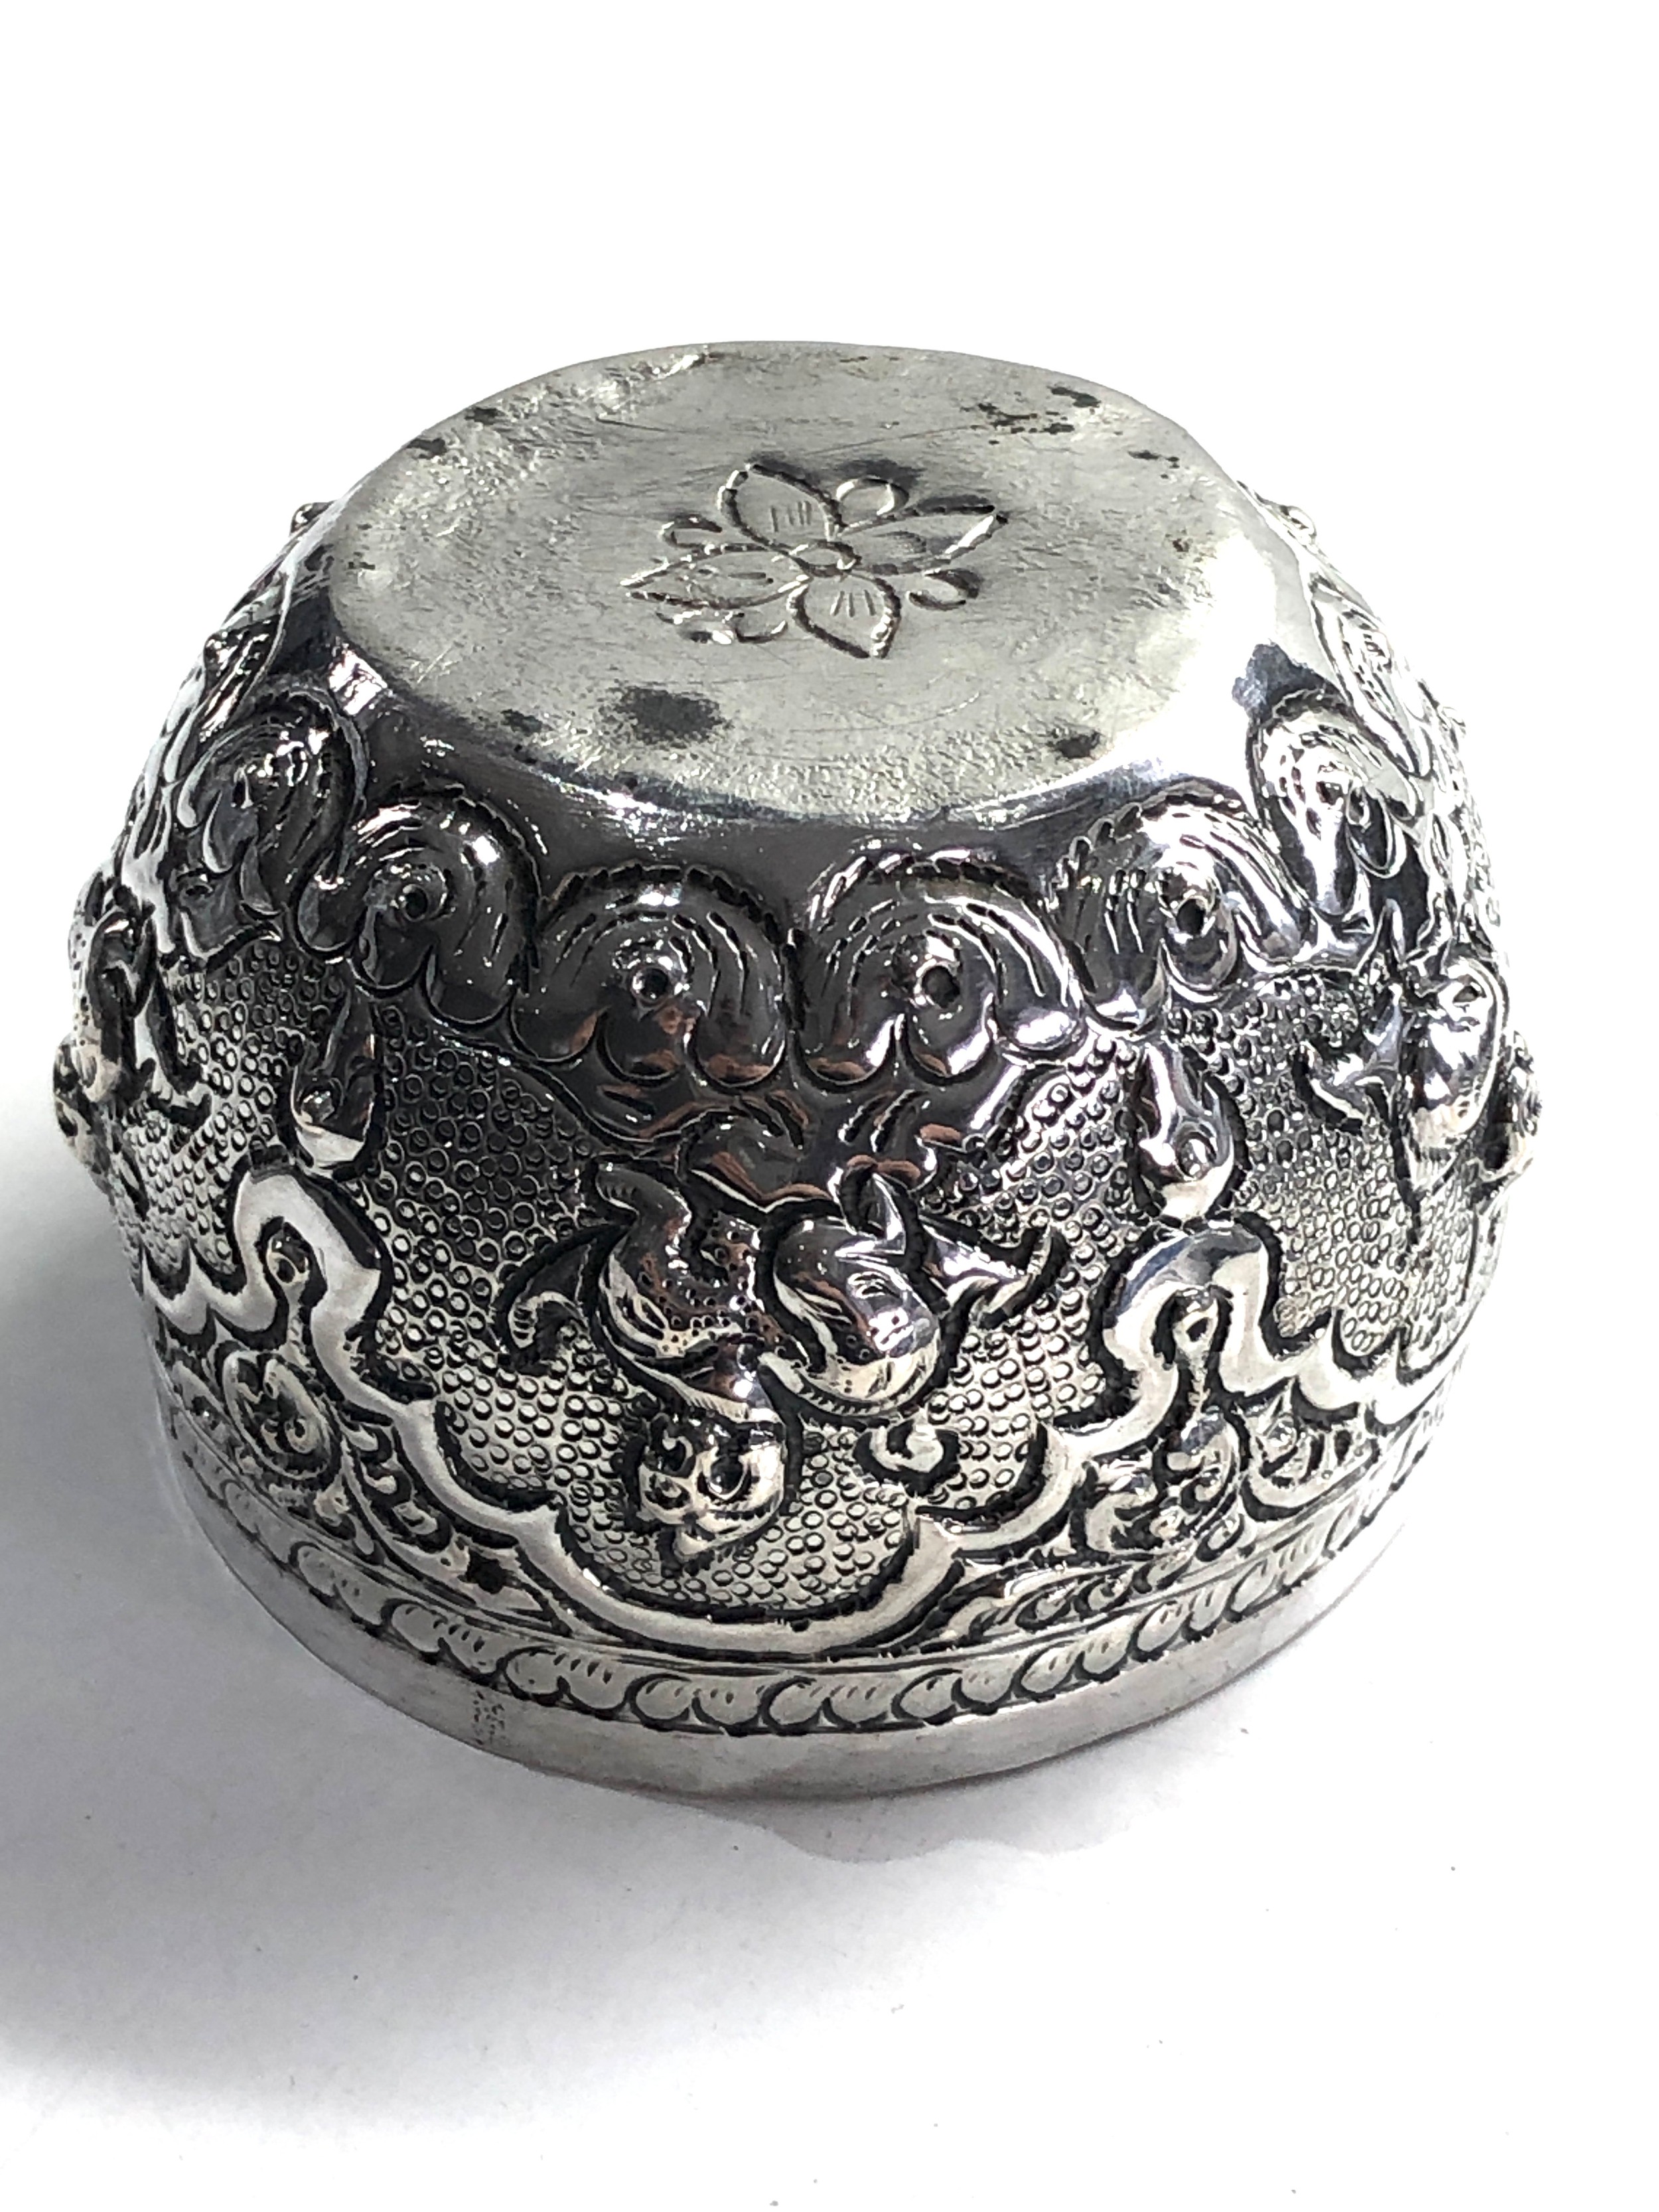 Indian silver bowl weight 60g xrt tested as silver - Image 2 of 2